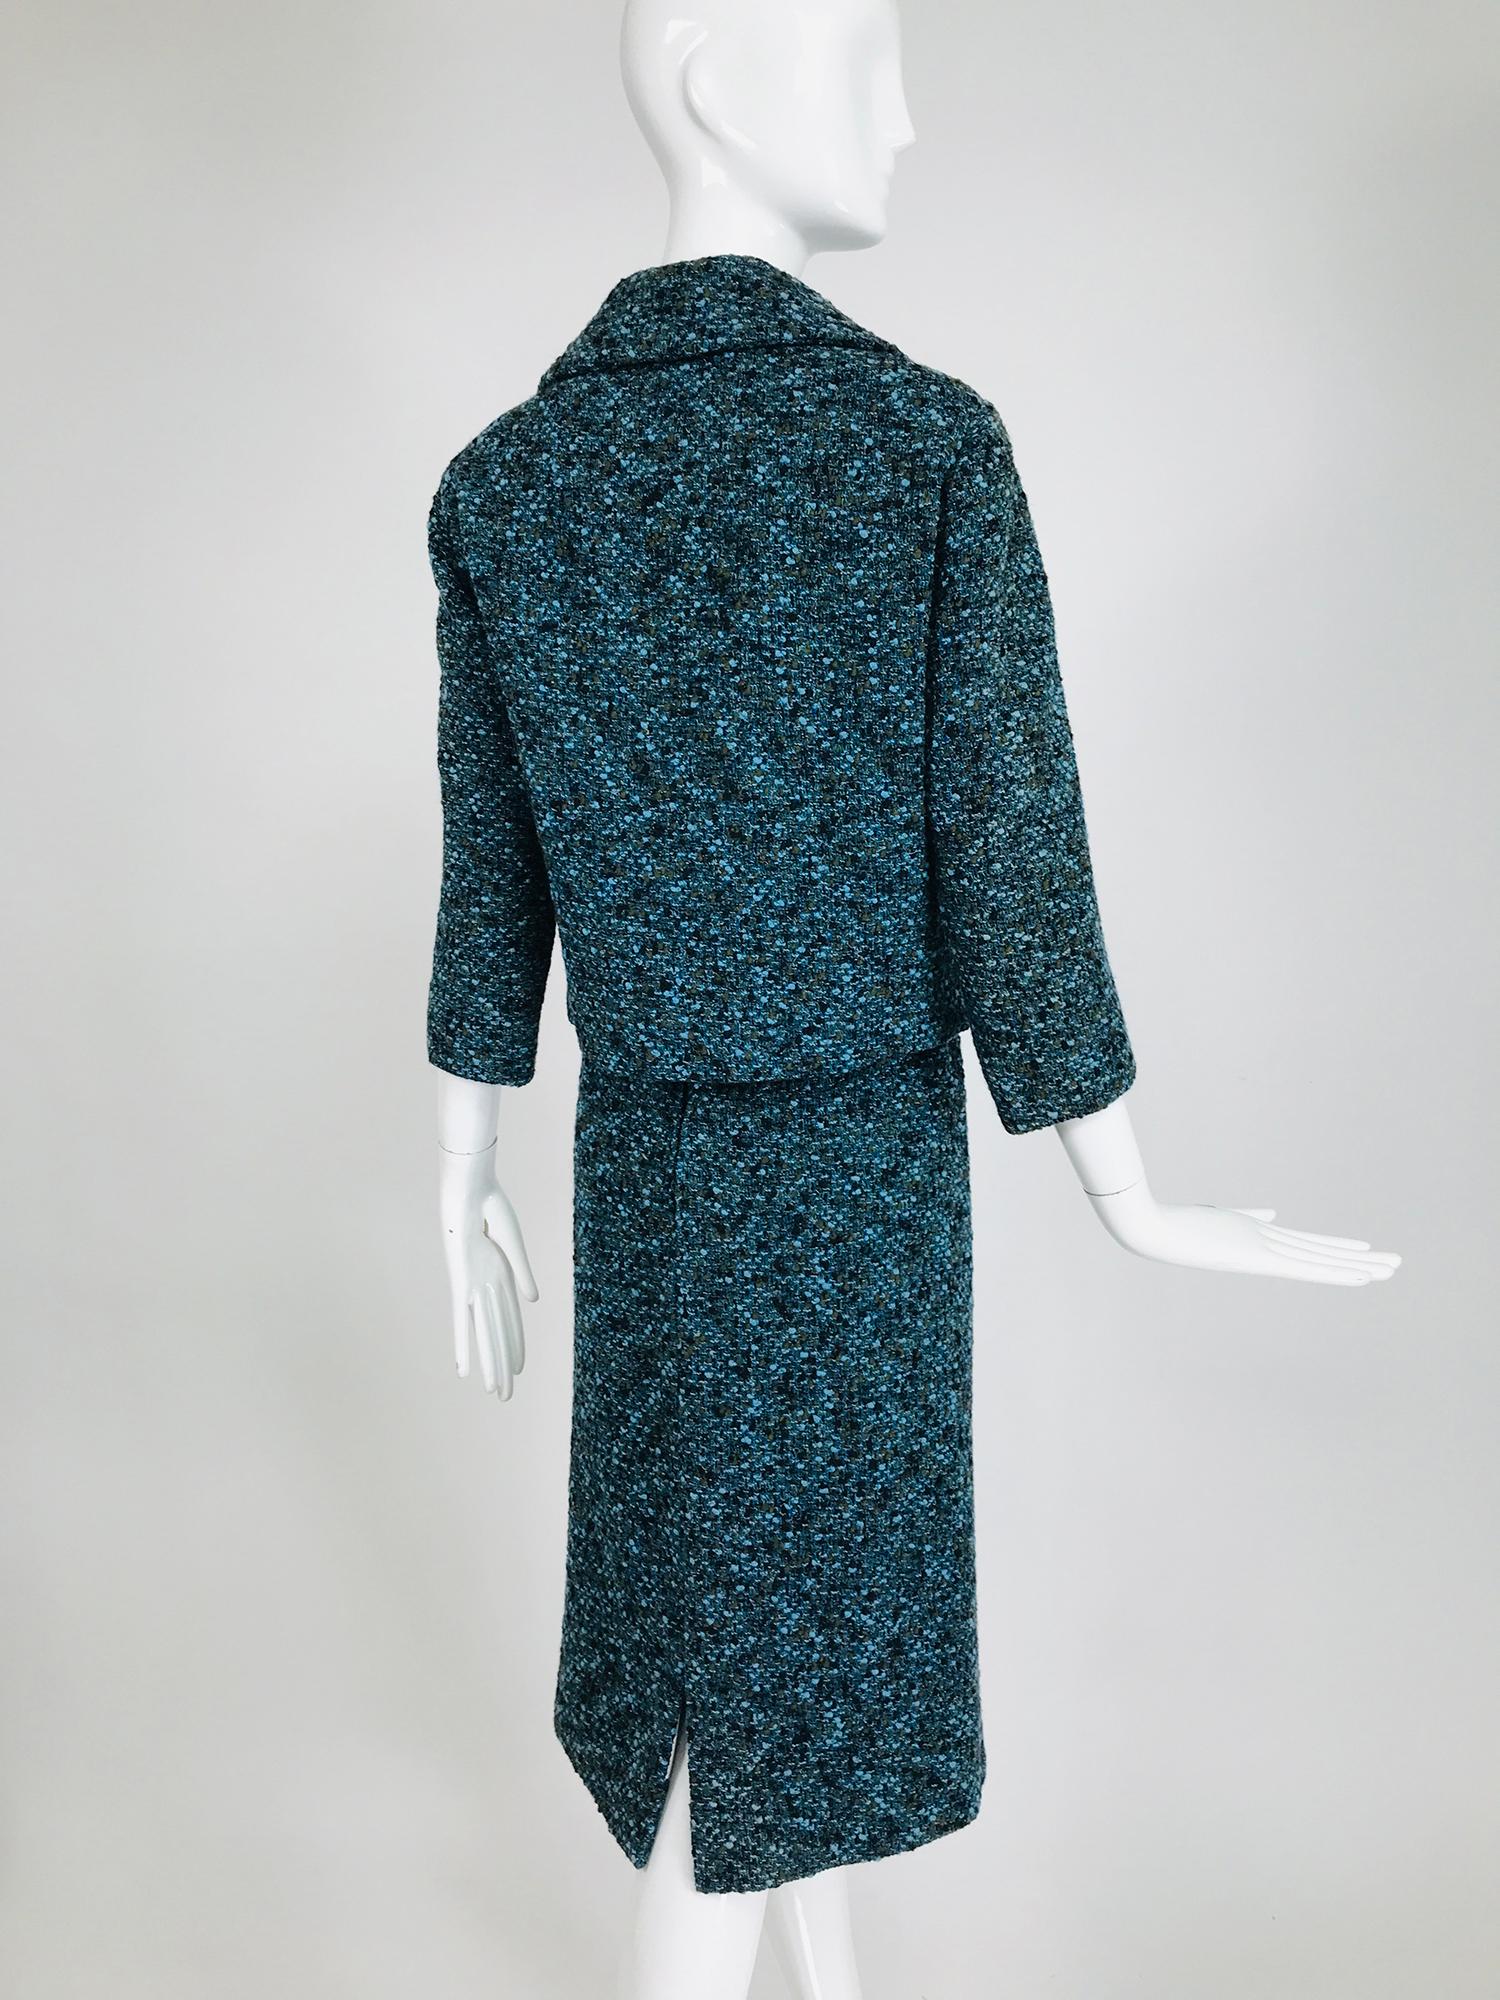 Jeanne Lanvin Numbered Couture Early 1960s Blue Tweed Skirt Suit  For Sale 2